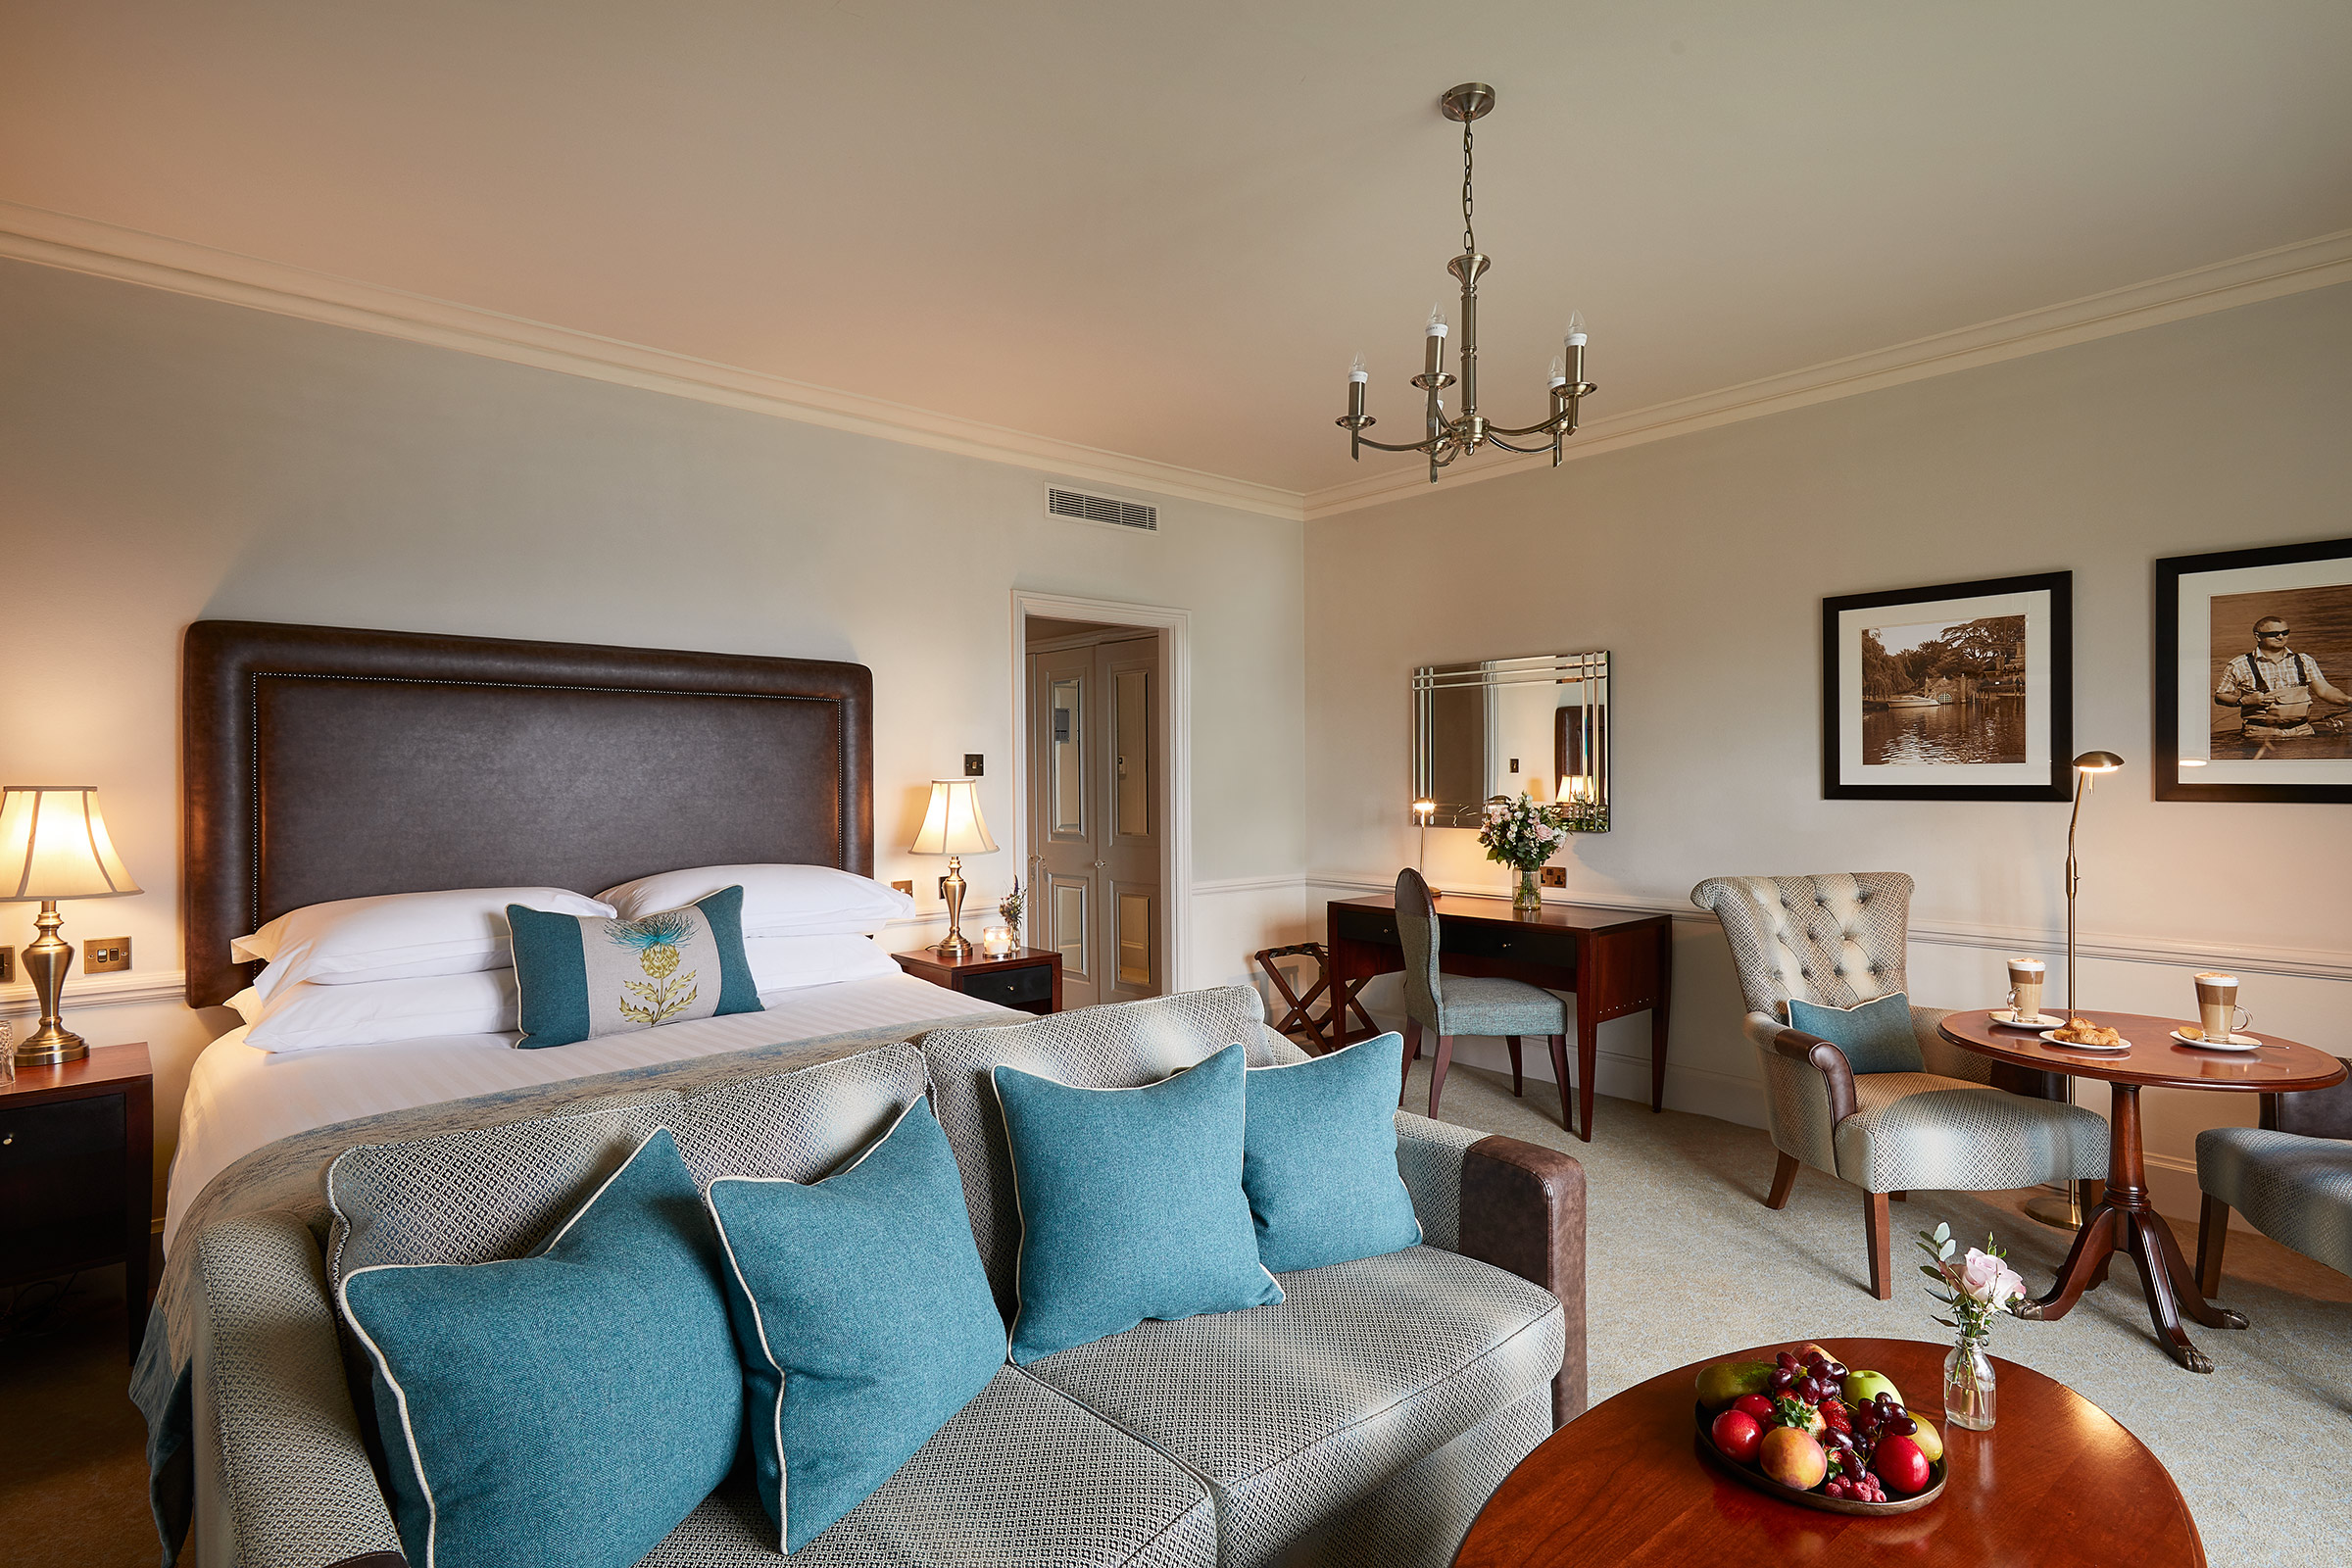 Compleat Angler Hotel, Room 84, Super Deluxe King, hotel interiors and lifestyle photographer